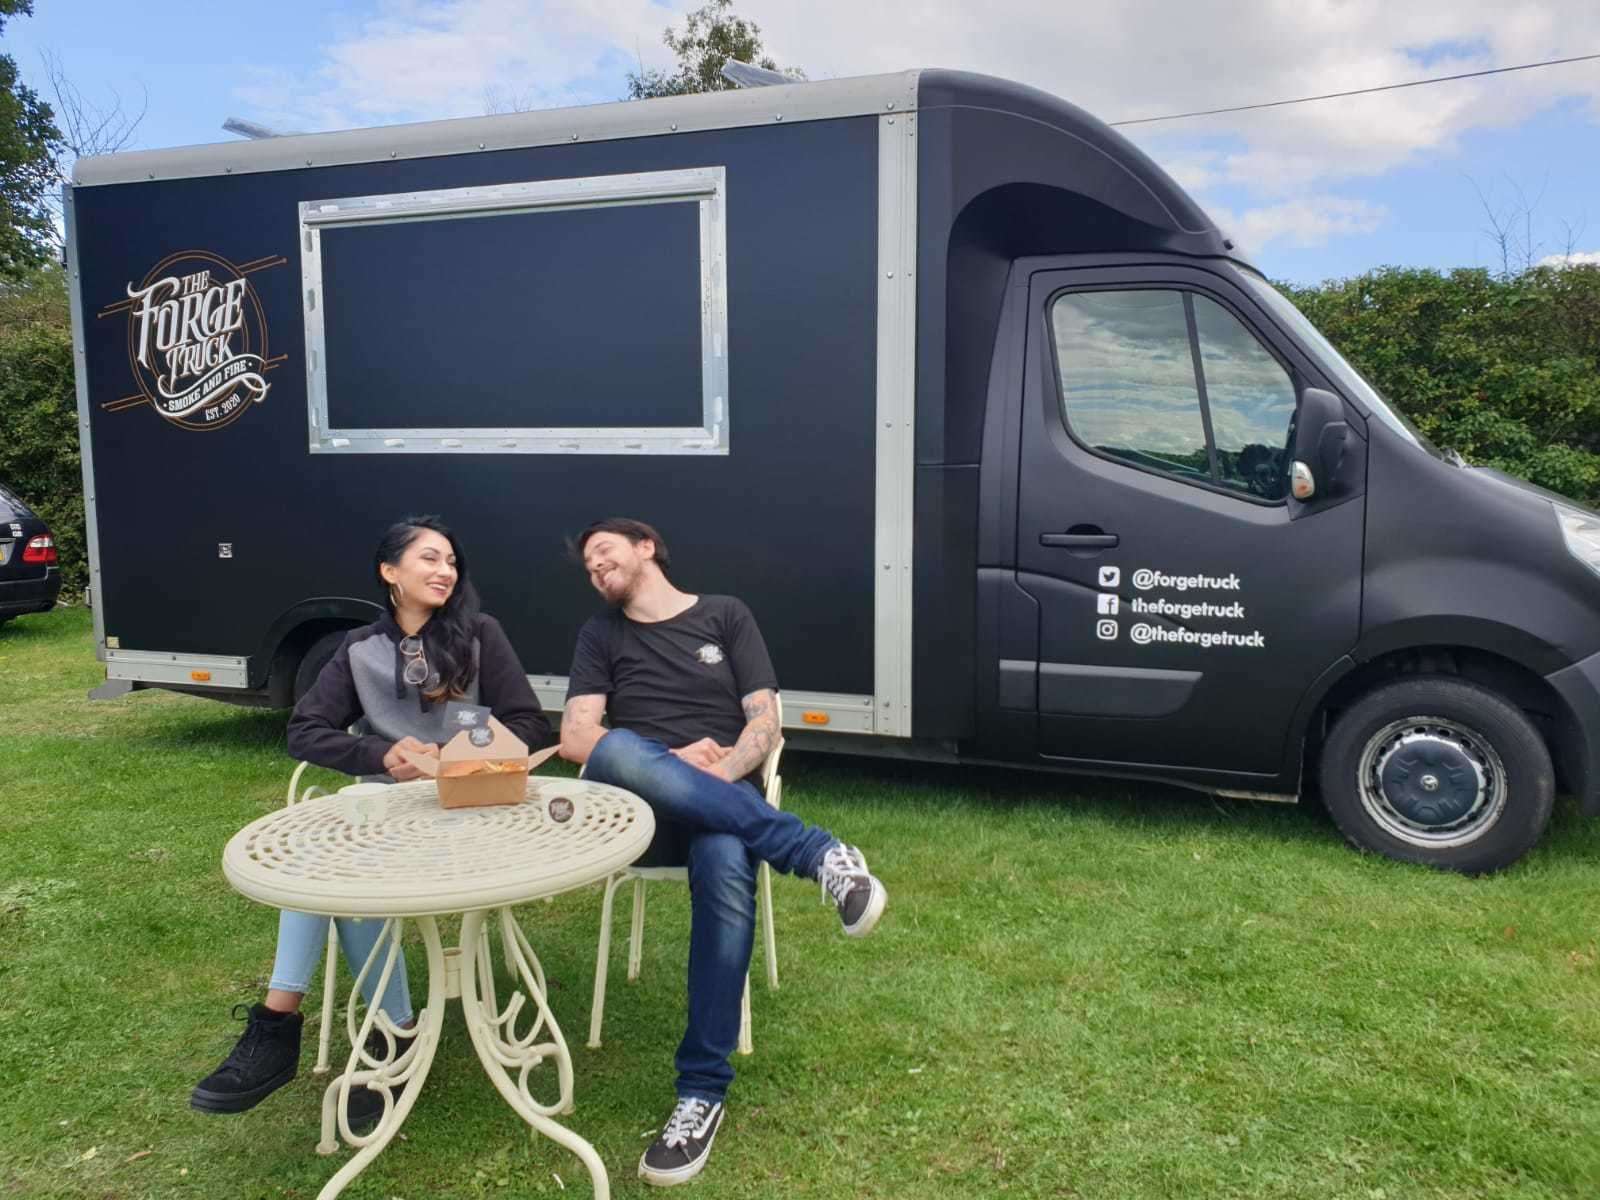 The Forge Truck: Arran Smith and Farah Ginai